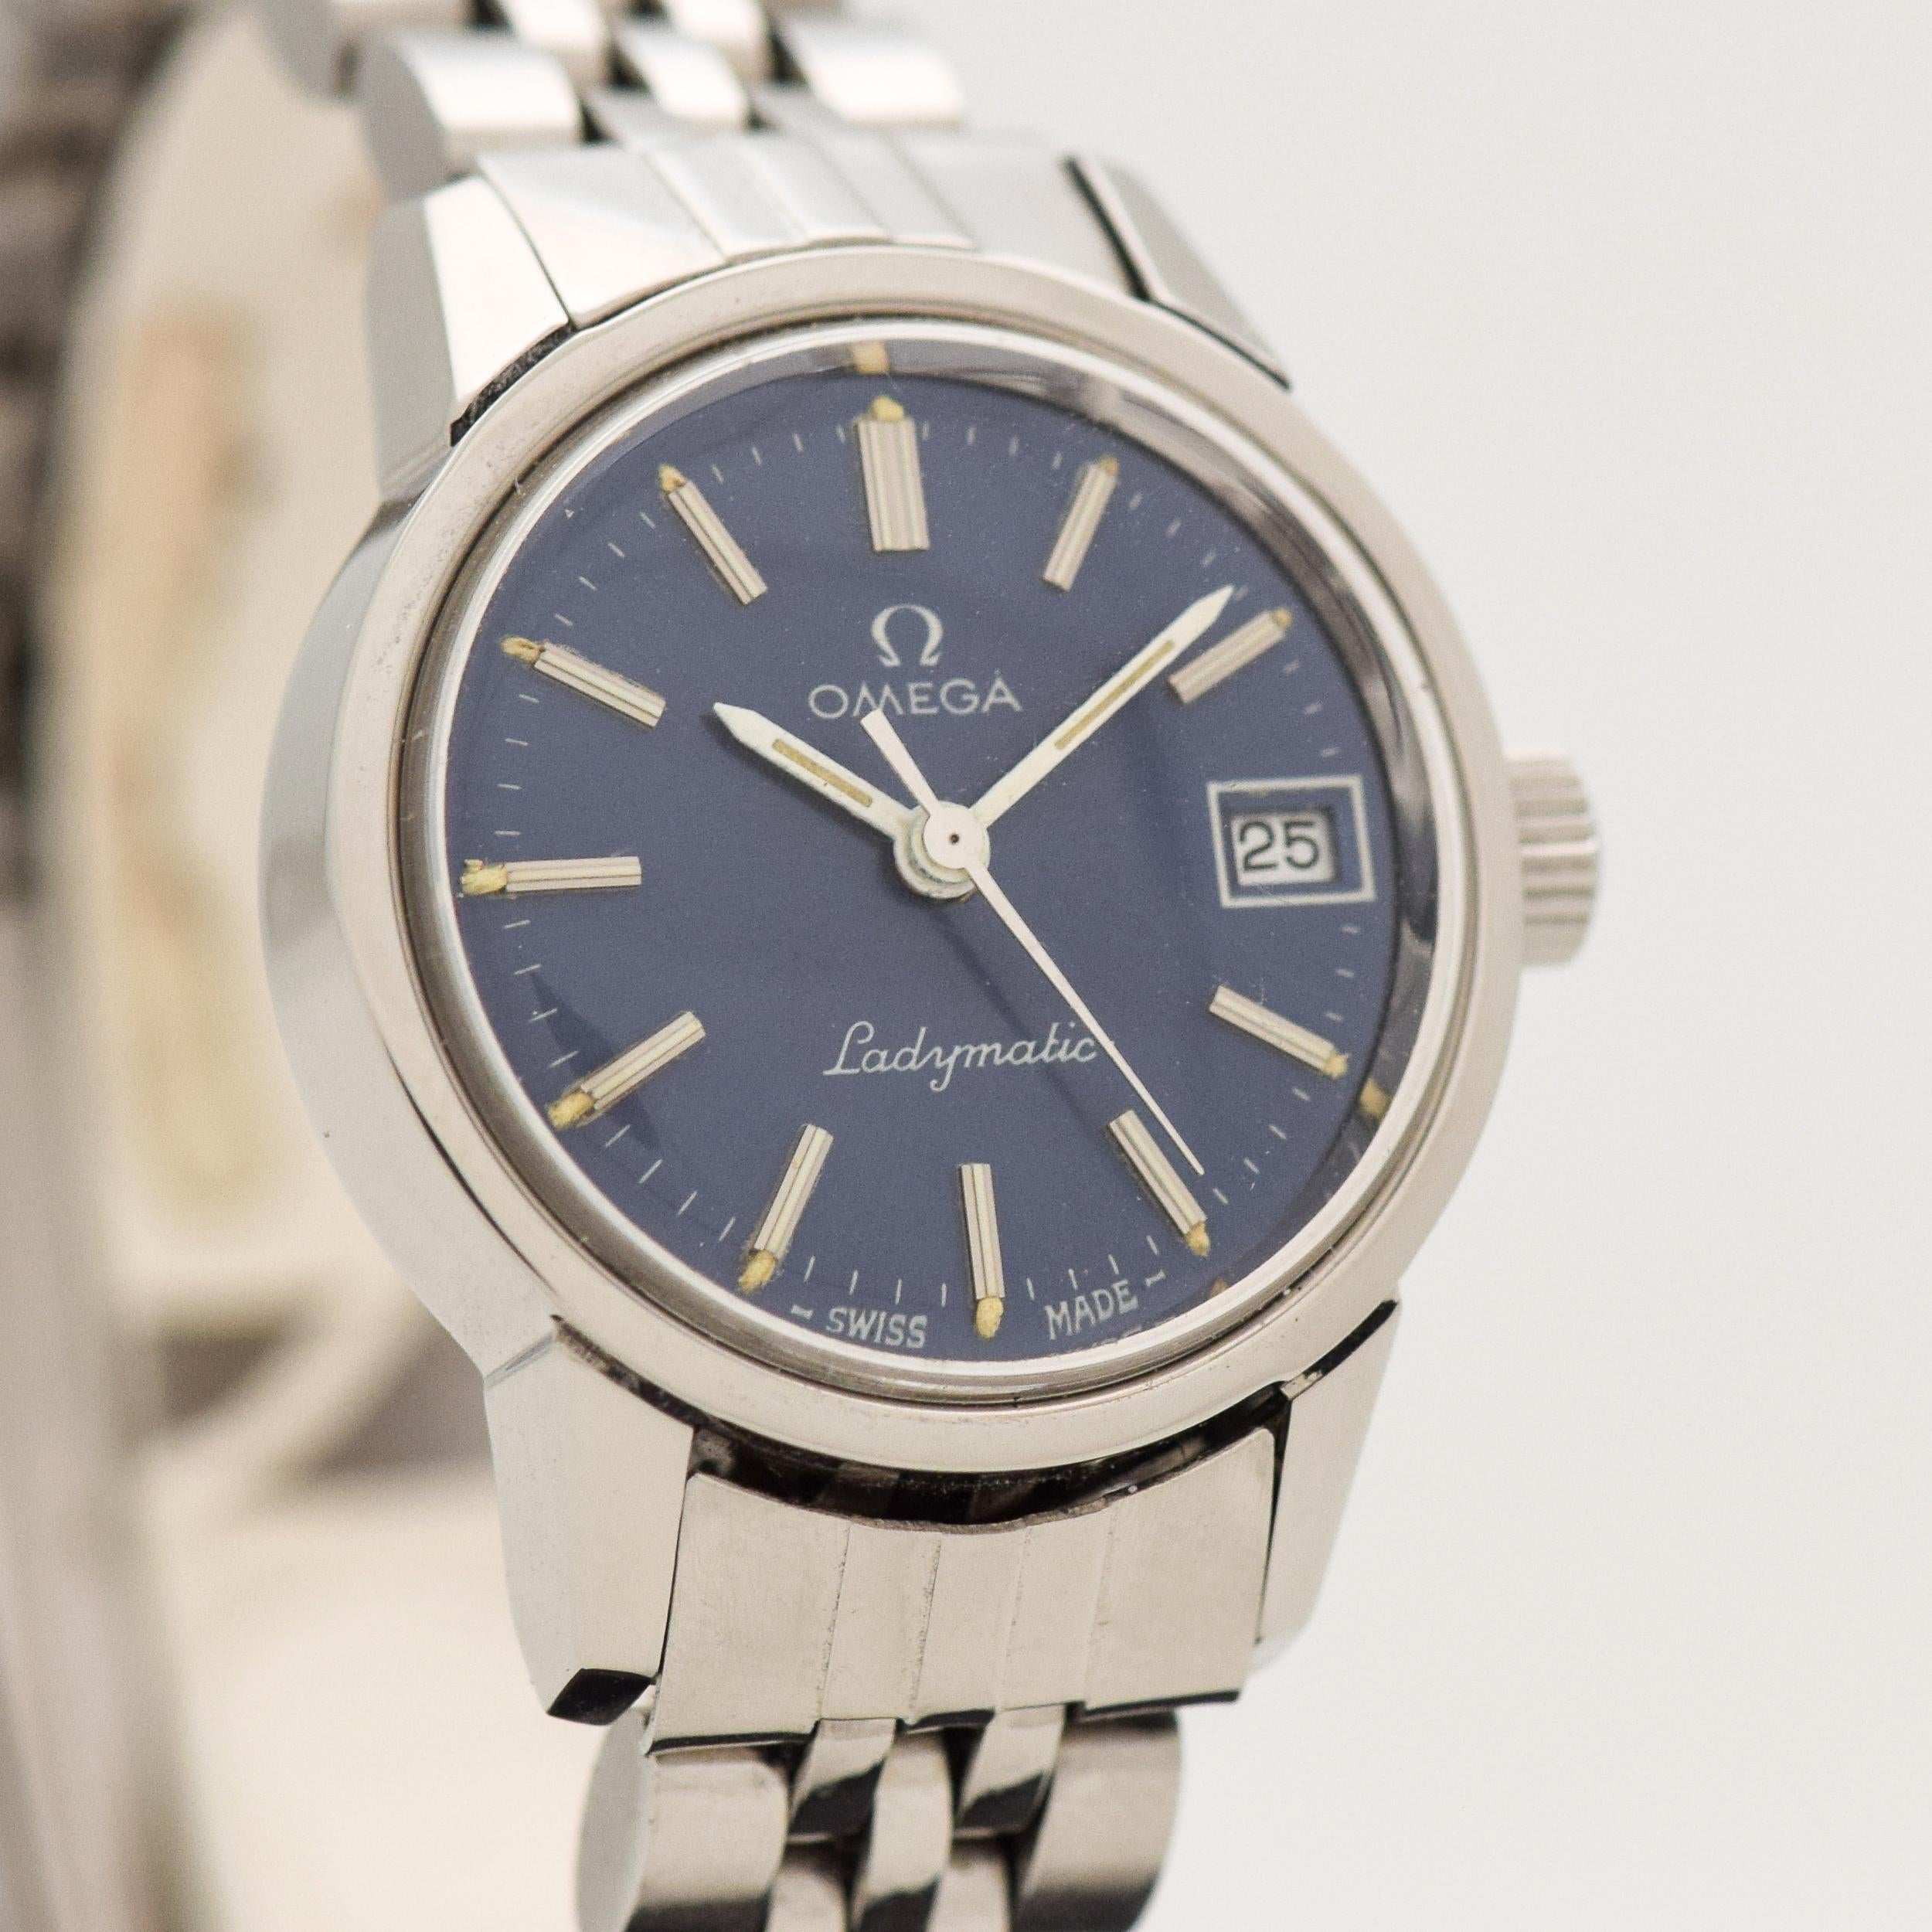 1973 Vintage Omega Ladies Ladymatic Ref. 5660045 Stainless Steel watch with Original Blue Dial with Applied Steel Beveled Stick/Bar/Baton Markers with White Inlay with Original Omega Stainless Steel Bracelet. Case size, 22mm x 27mm lug to lug. 